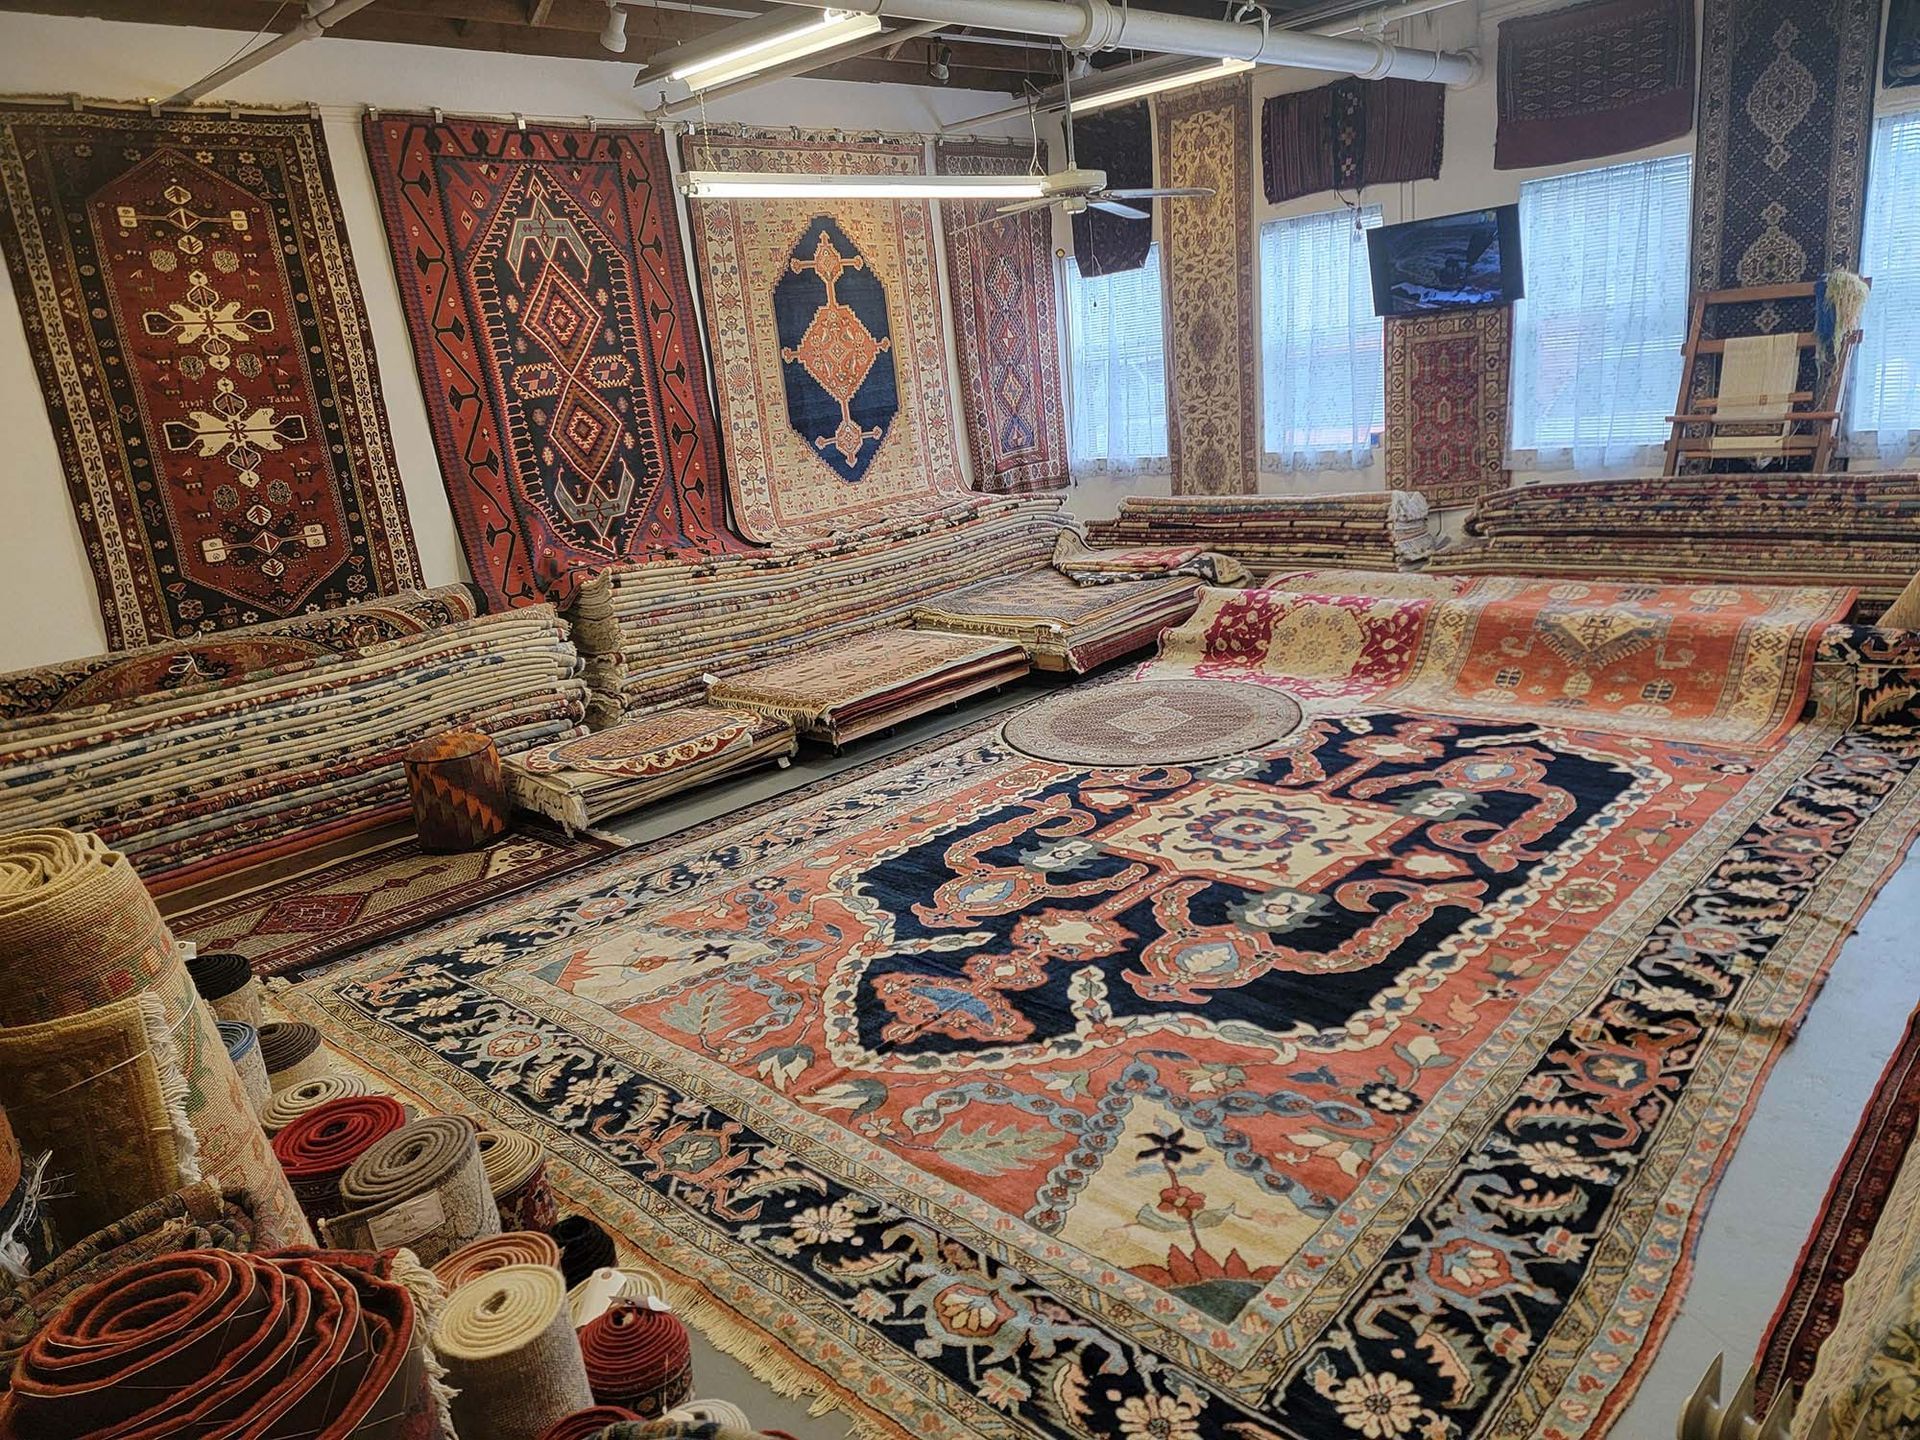 a room filled with lots of rugs and carpets.